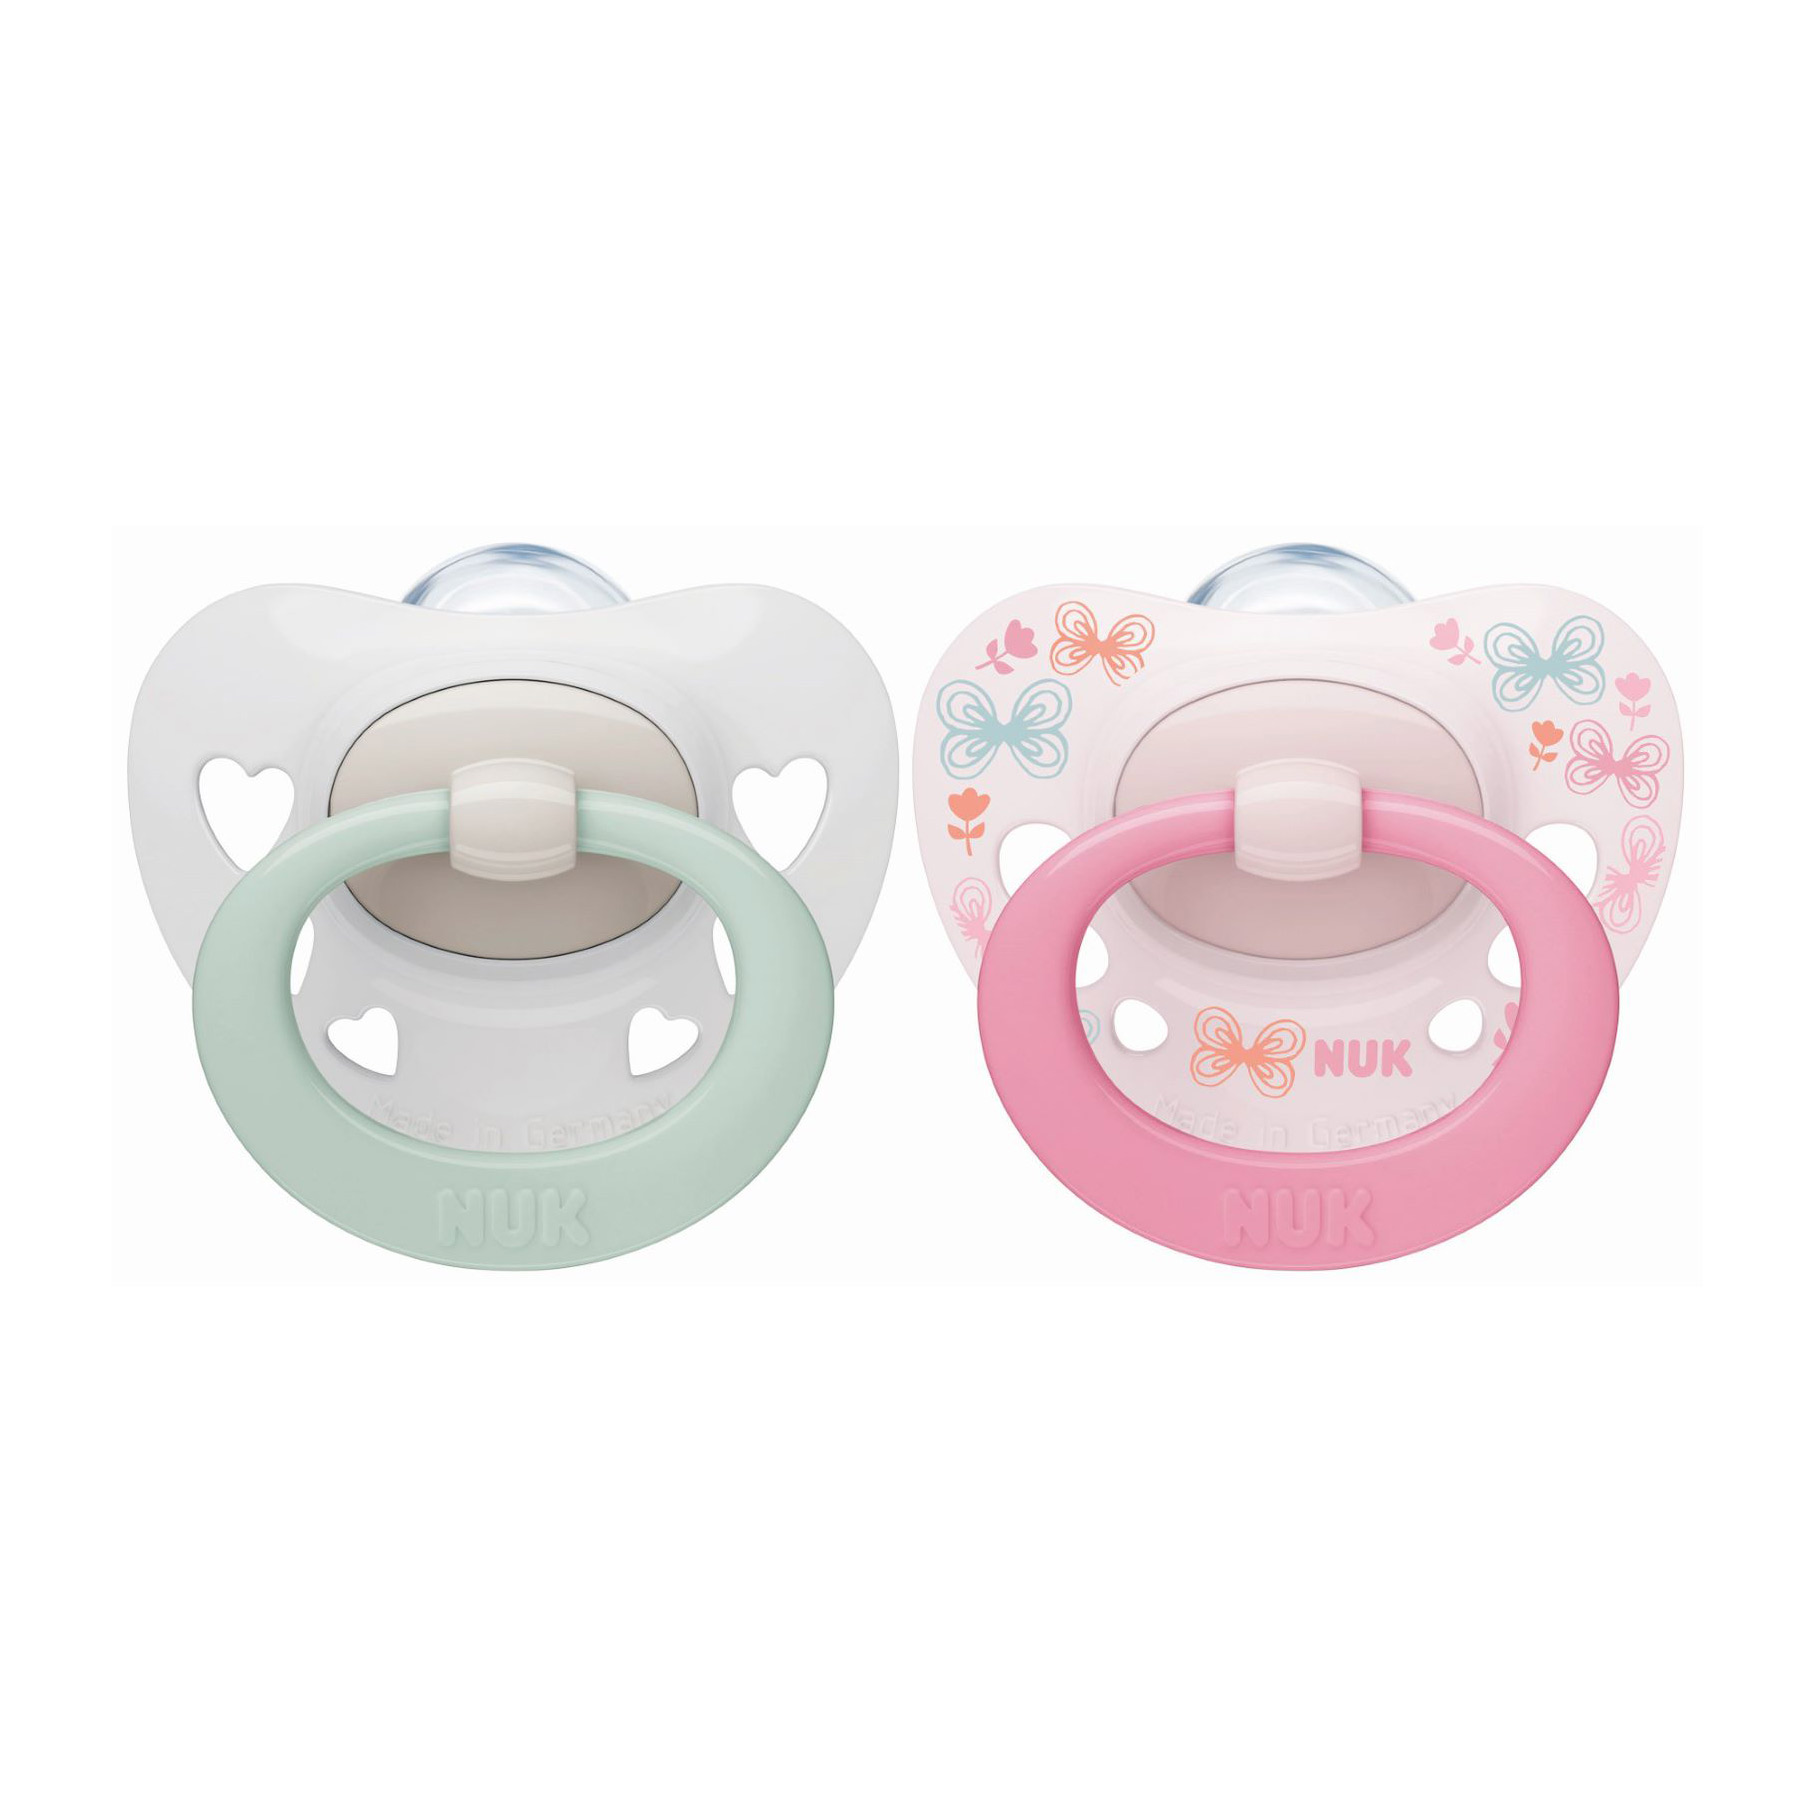 Nuk Sucette Silicone Star Day & Night 0-6 mois Chat/Etoiles